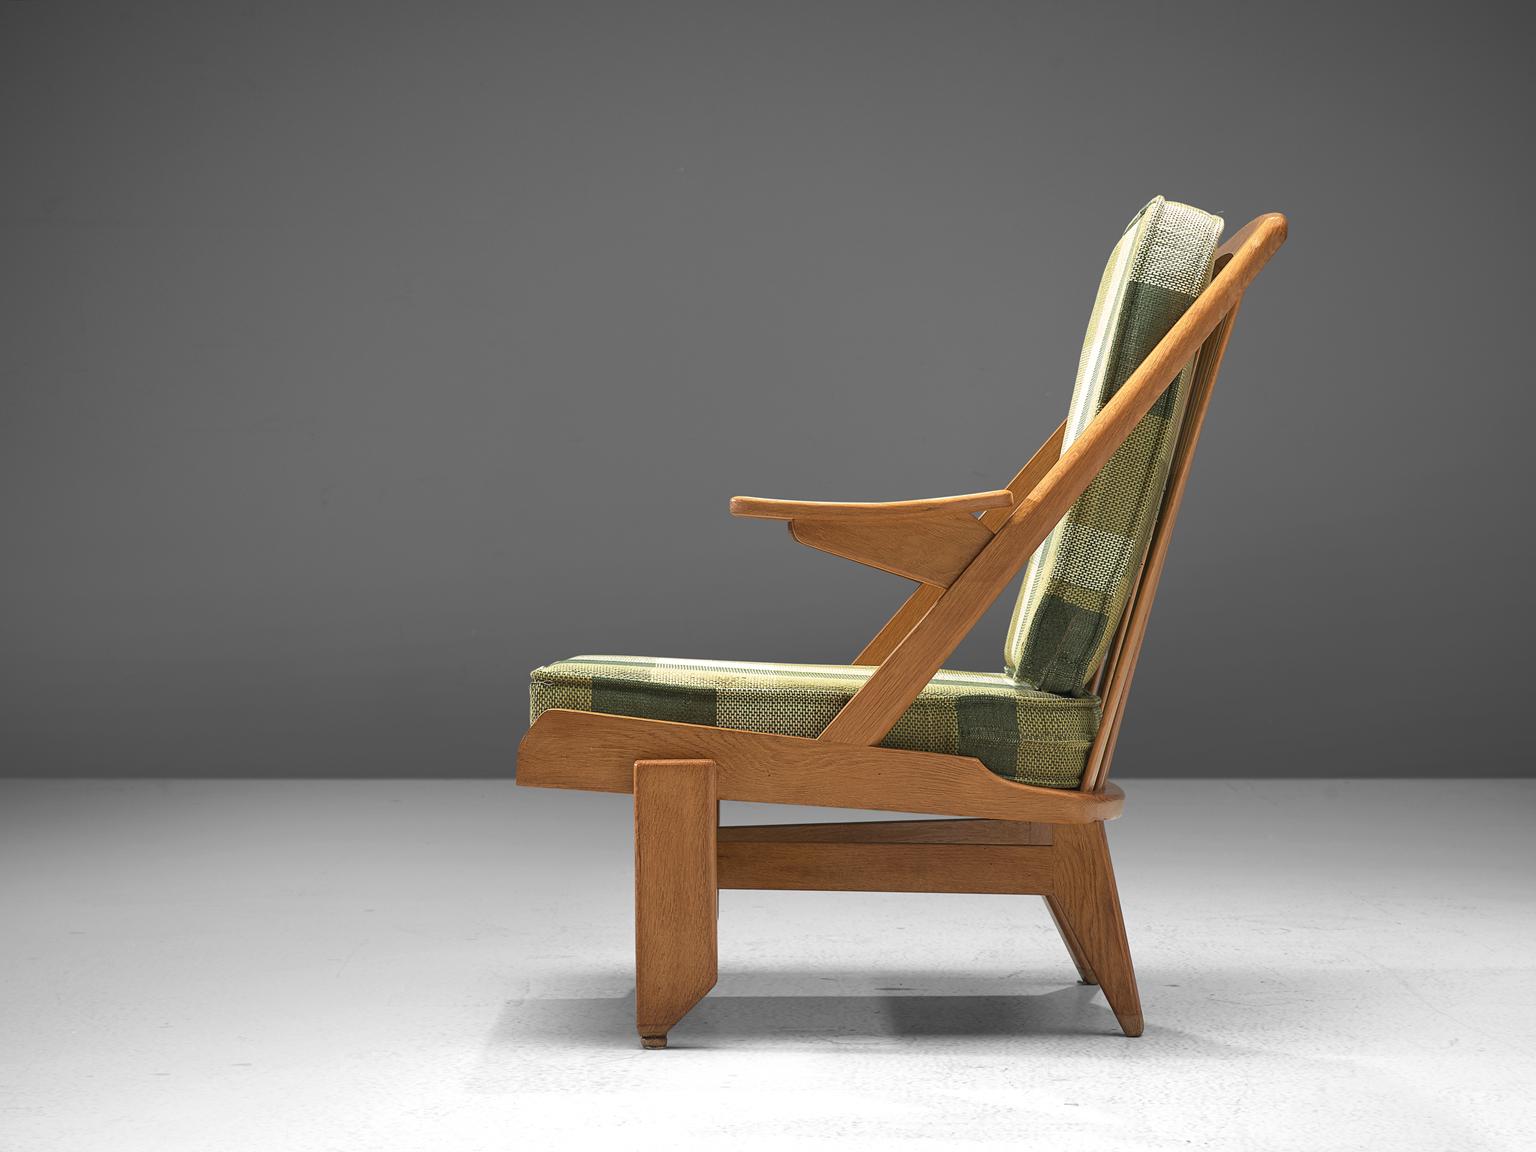 Guillerme and Chambron, lounge chair, green checkered fabric and oak, France, 1950s. 

This French designer duo is known for their extreme high quality solid oak furniture, from which this lounge chair is another great example. This chair has a very